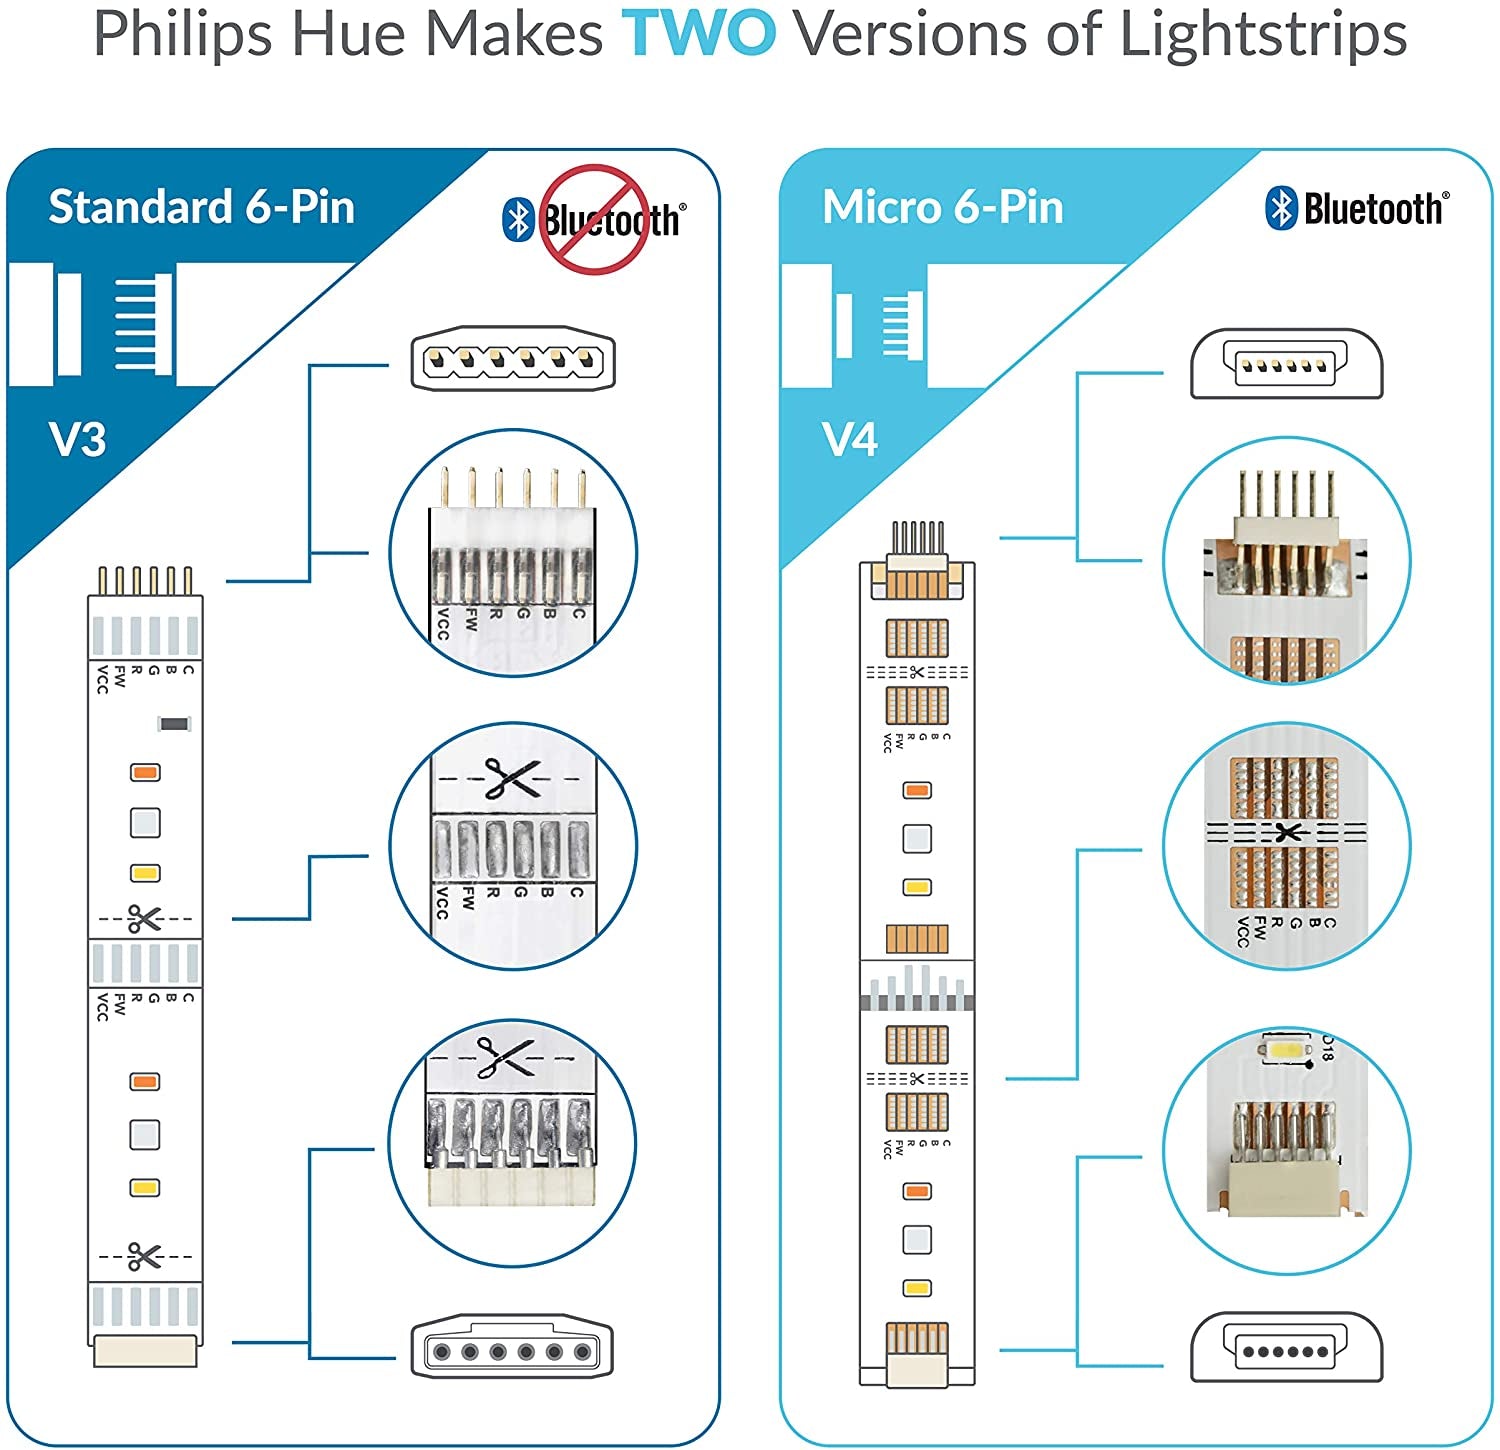 Litcessory, Litcessory Extension Cable for Philips Hue Lightstrip plus (150Mm, 5 Pack, White - Micro 6-PIN V4)